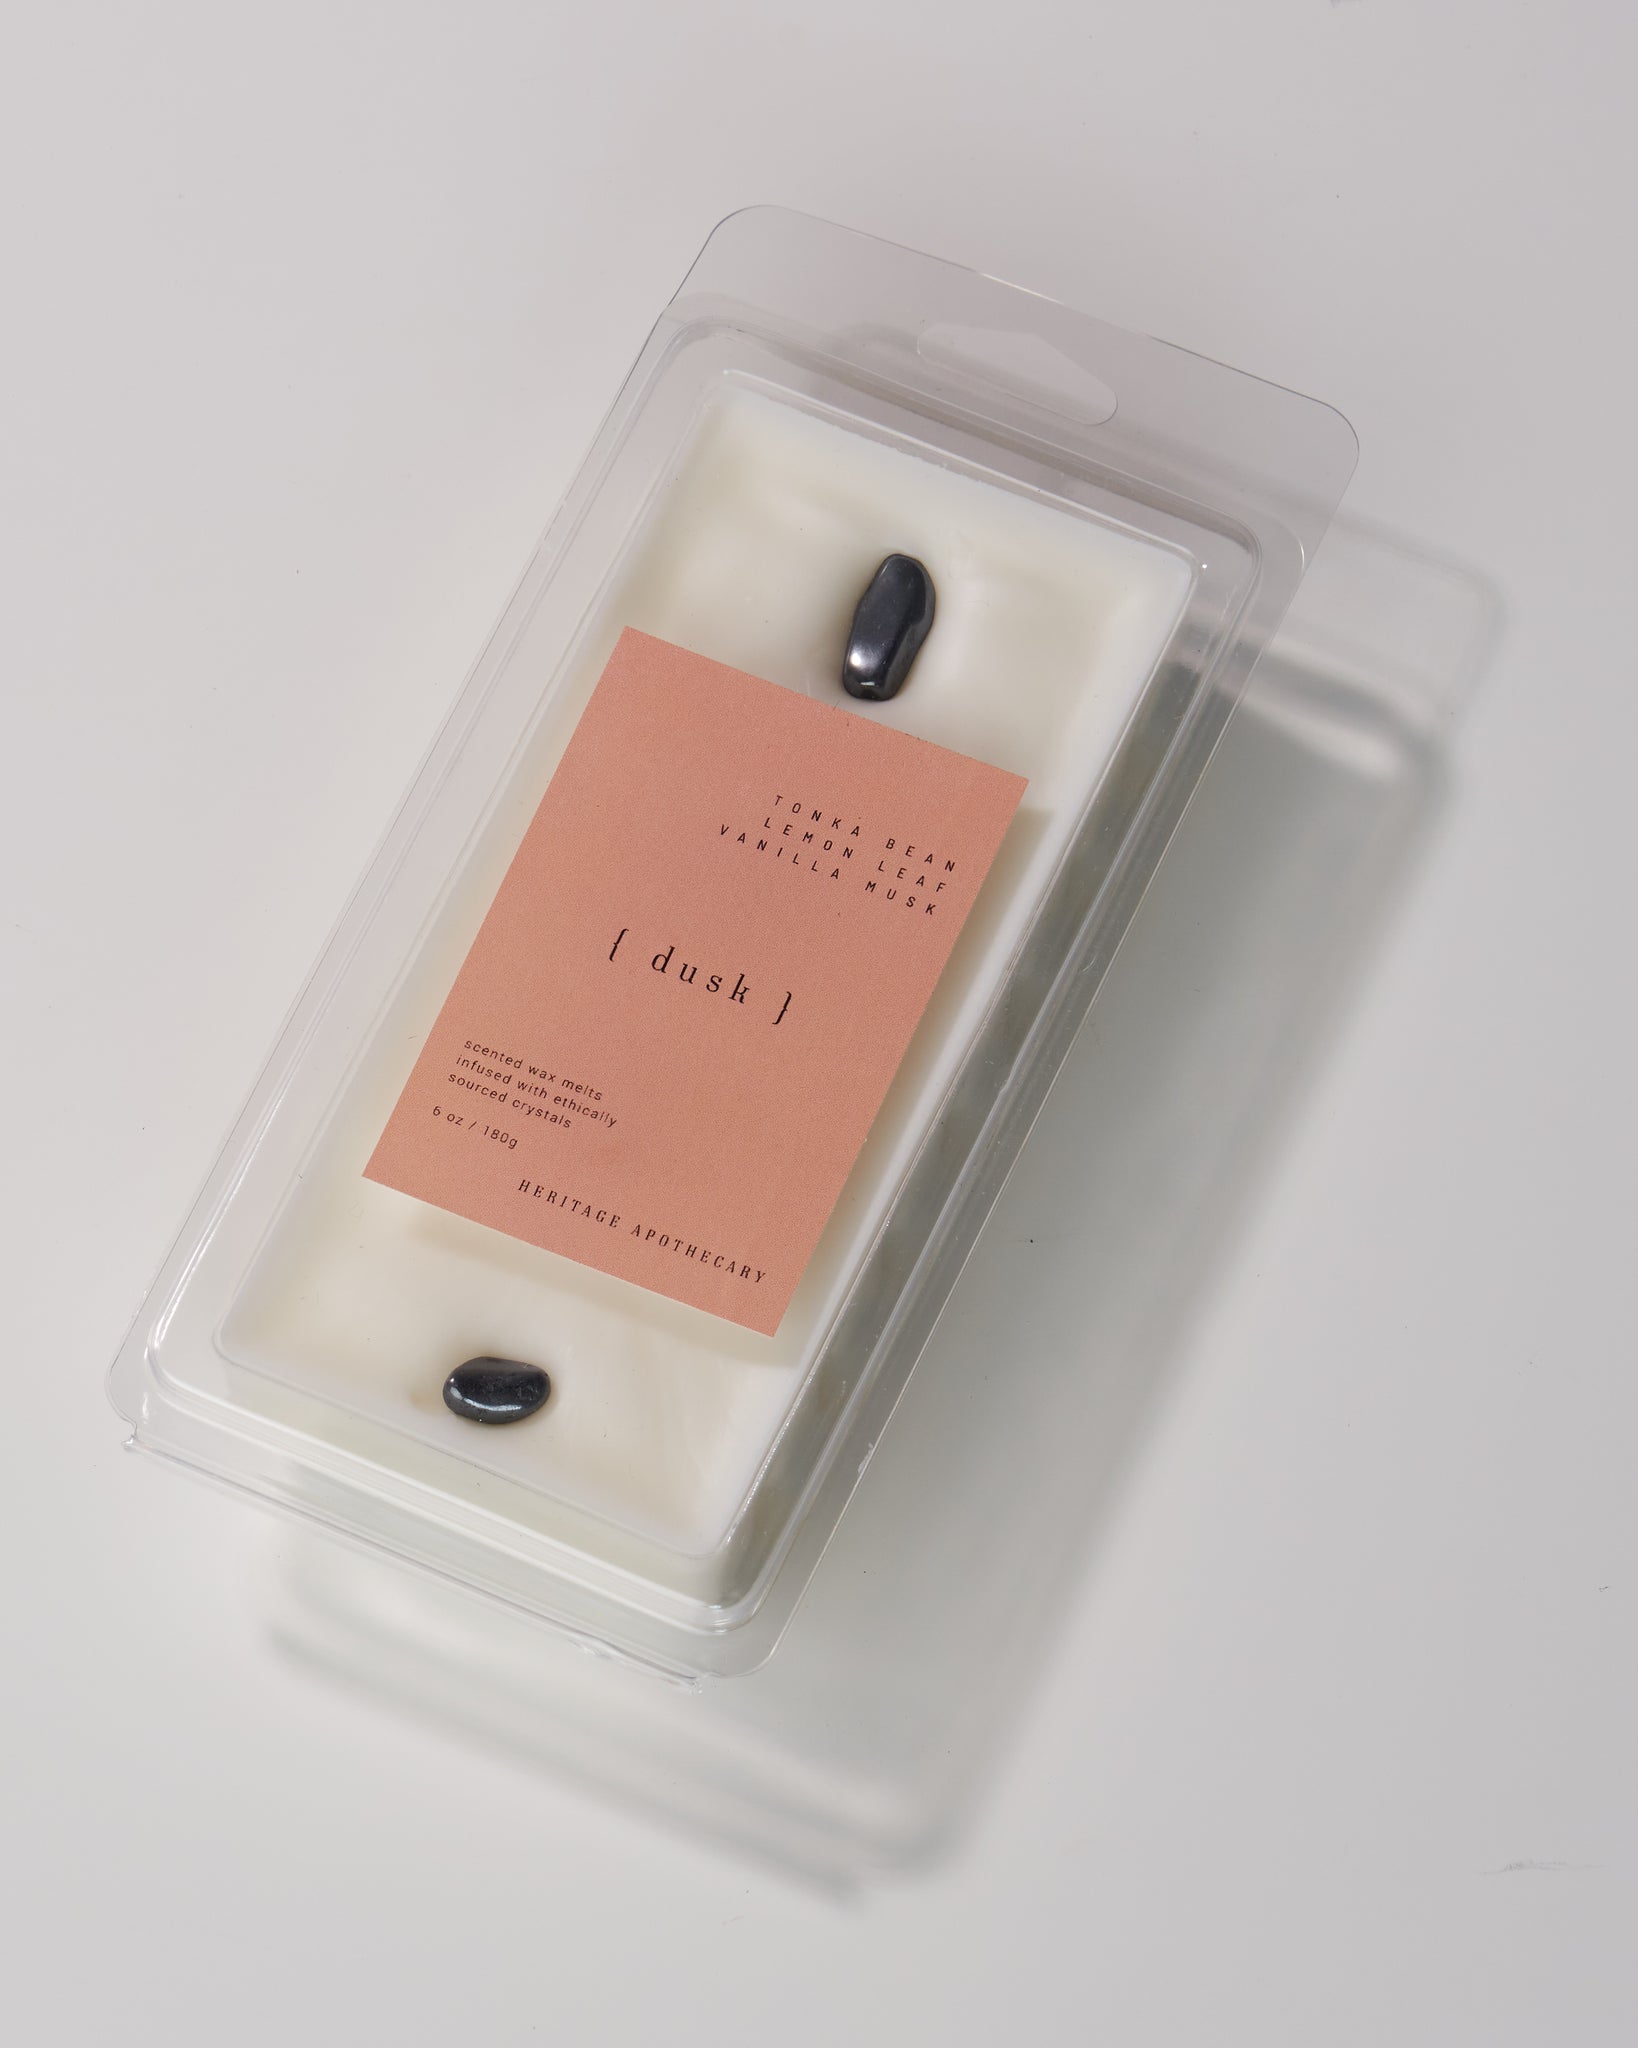 Handcrafted coconut and soy wax melts in Dusk scent. Lemon, jasmine, cyclamen, rose, vanilla, and musk notes. Hematite crystals for a touch of luxury. Elevate your home fragrance.